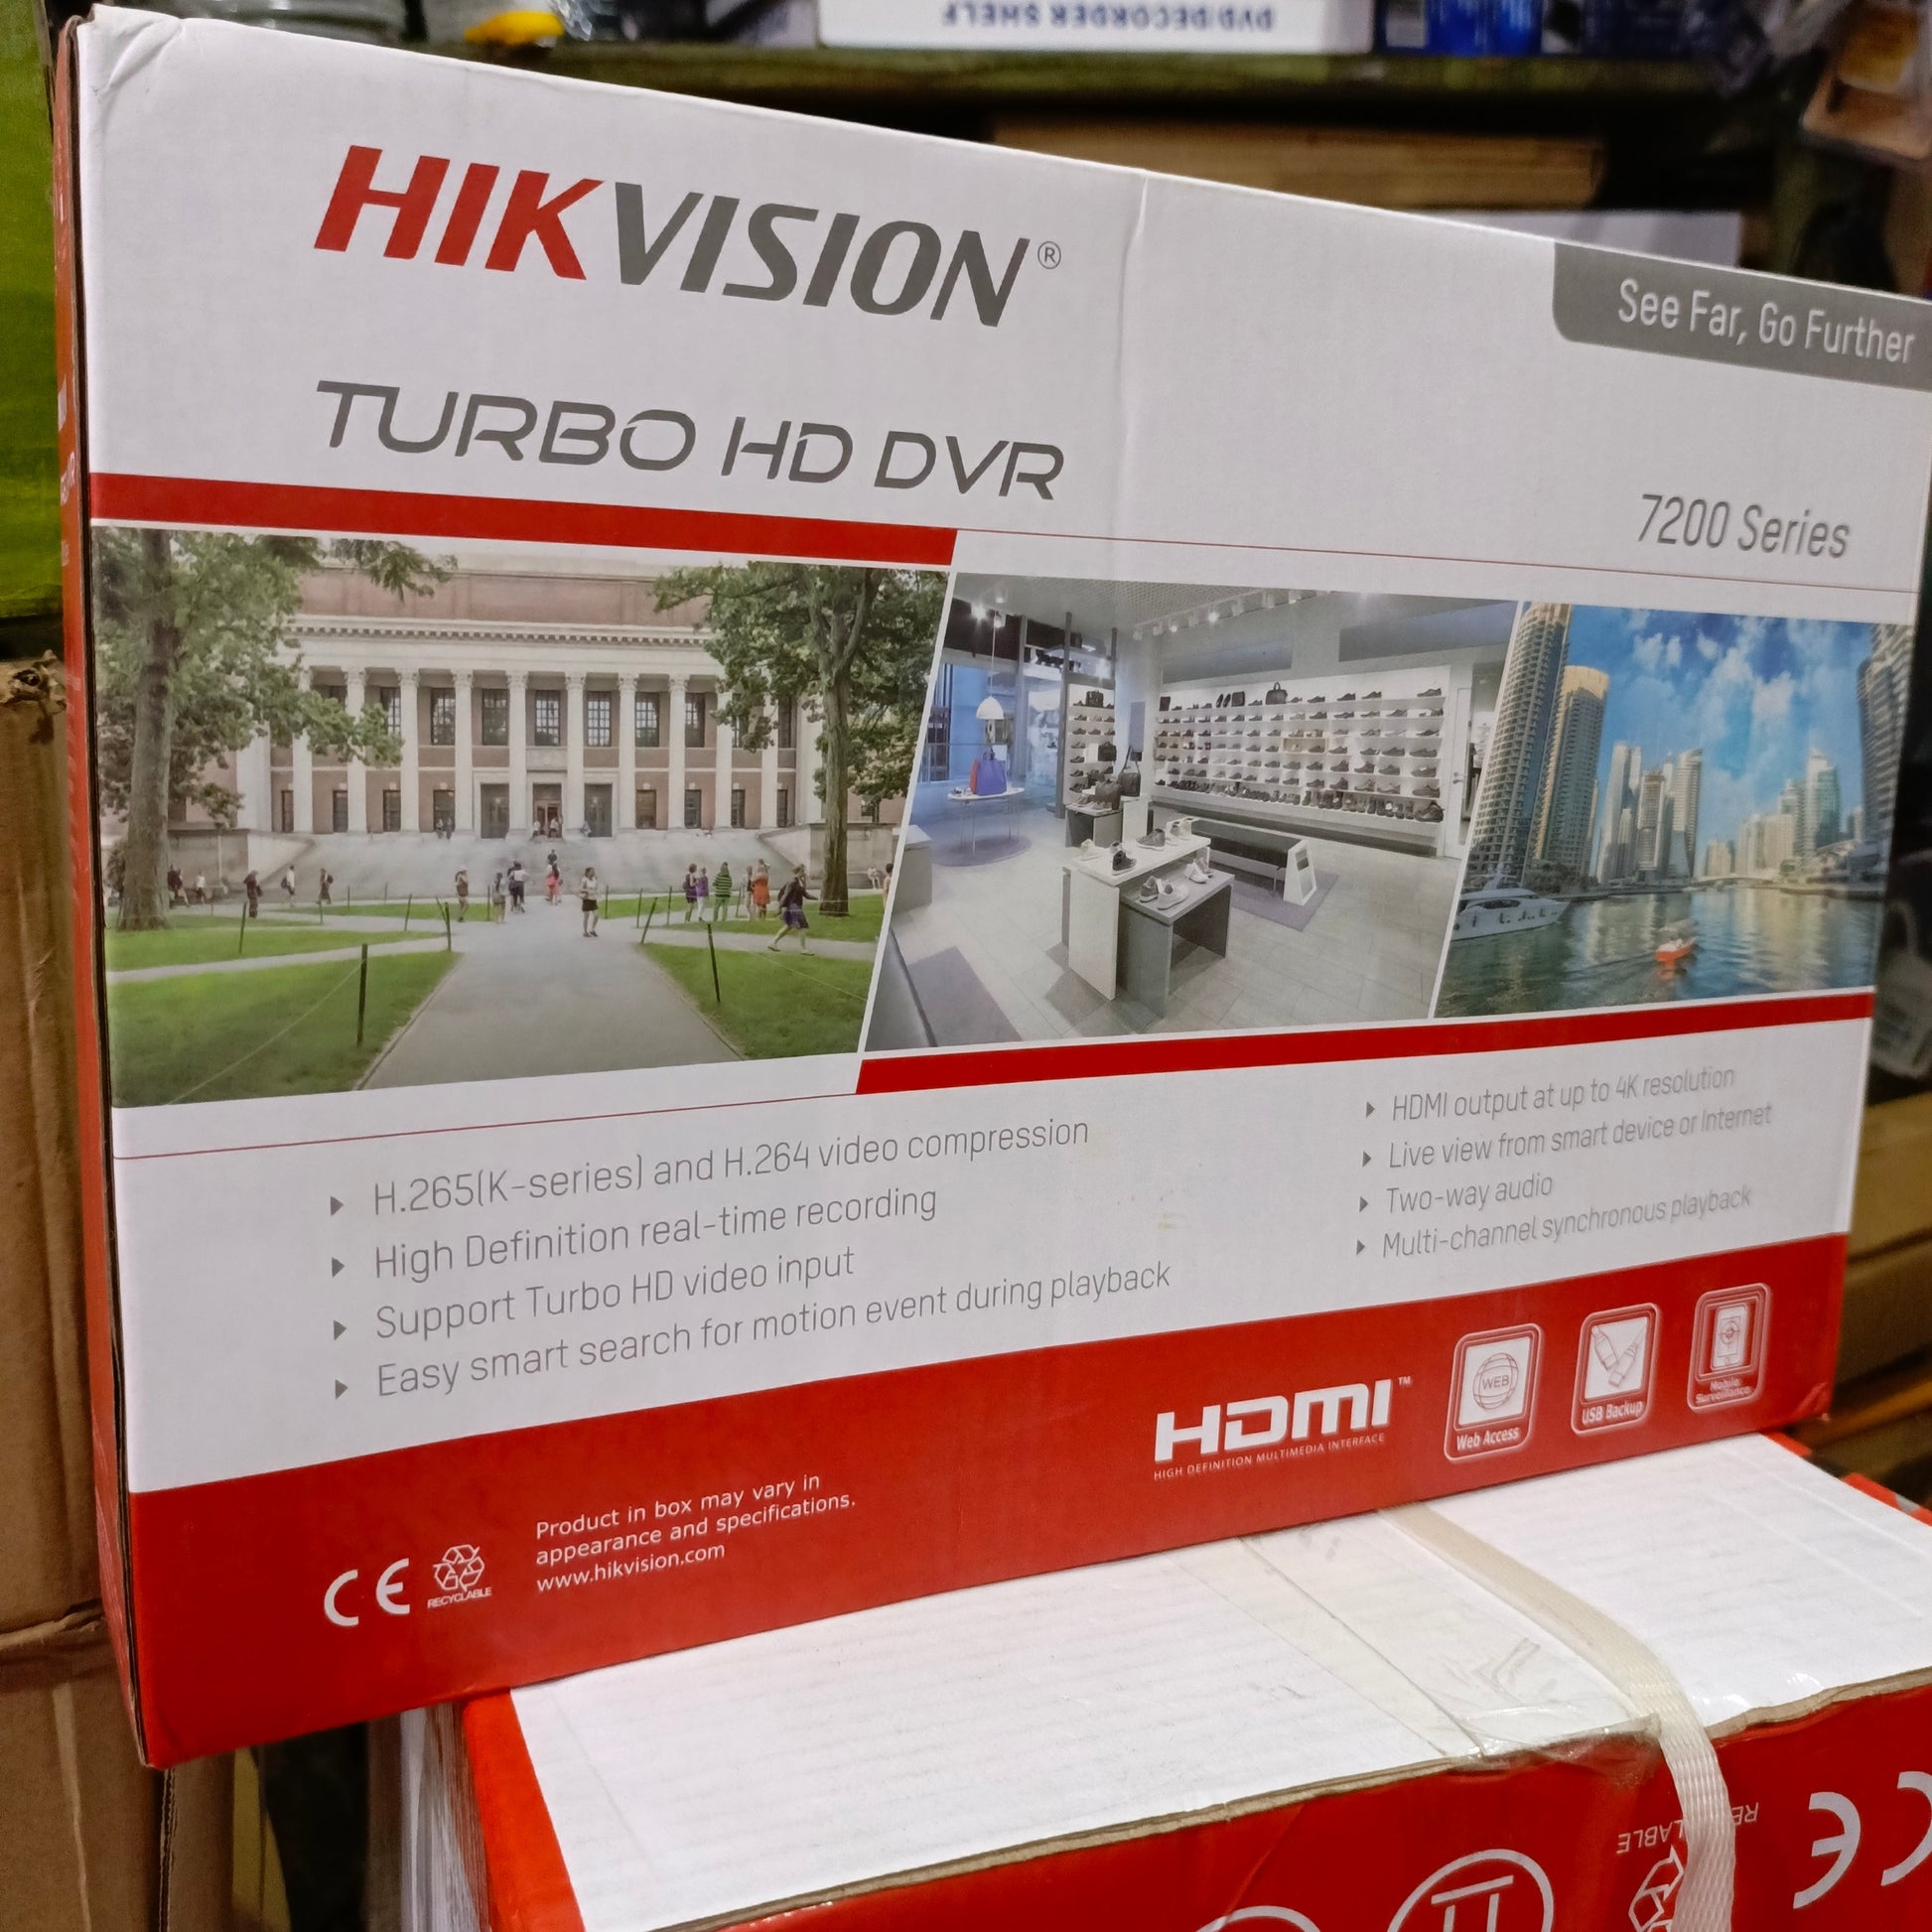 HIKVISION 4-Channel 2-Way 7200-Series 5MP 6-in-1 High Definition DVR (Supports IP, XVI, AHD, CVI, CVBS, TVI cameras) - Brand New